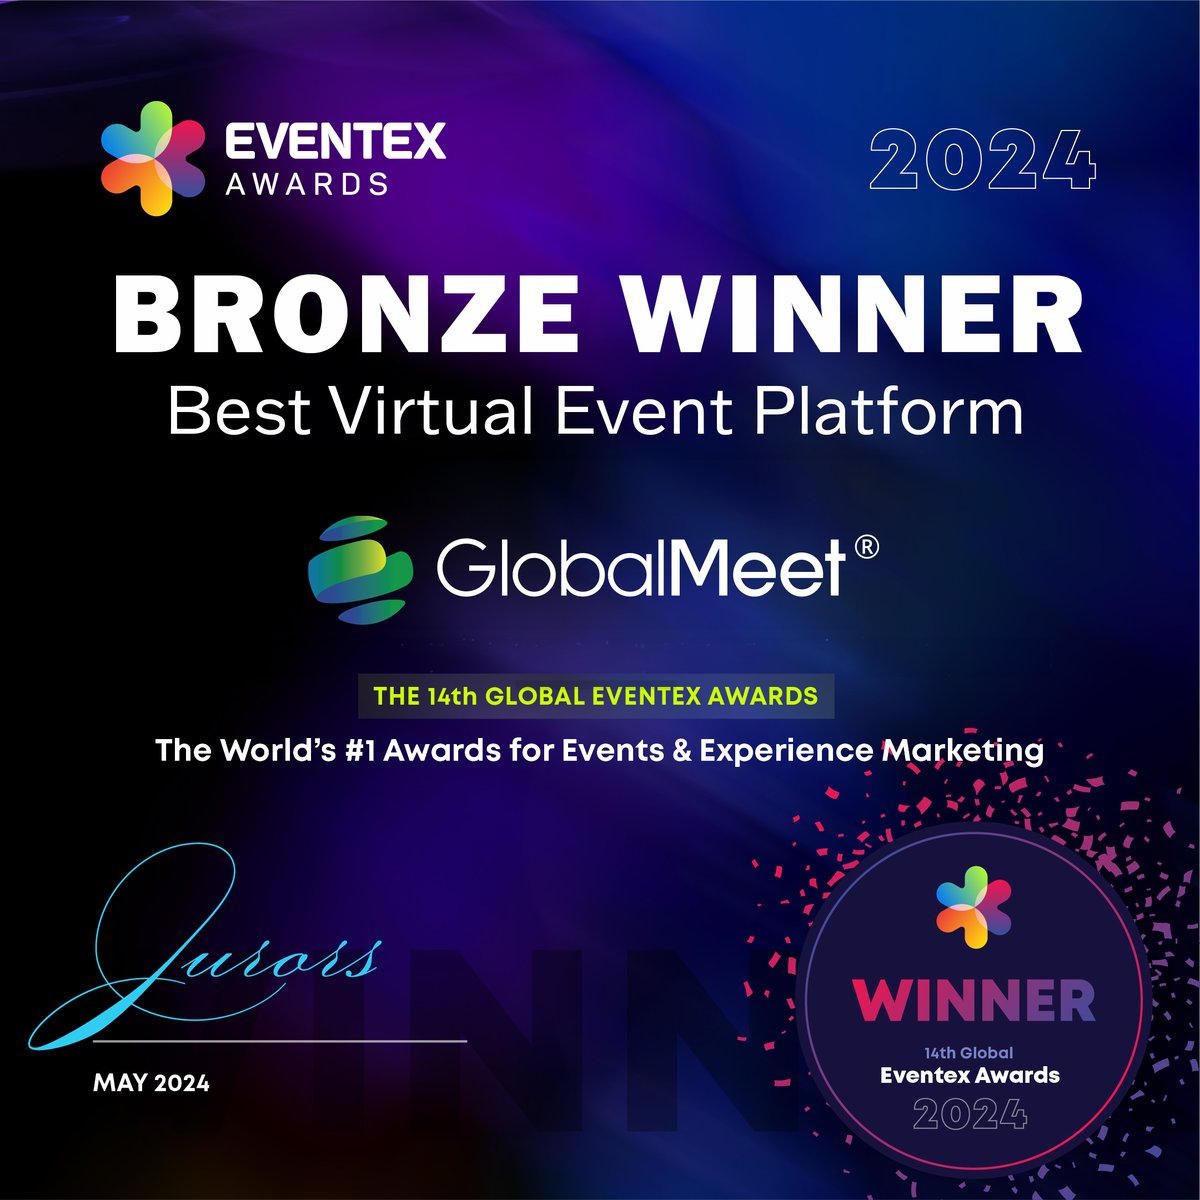 Exciting news! GlobalMeet won bronze in the prestigious 2024 Eventex Awards for Best Virtual Event Platform! Thrilled to celebrate this remarkable achievement with our powerhouse webcasting team! 🎉 #eventtech #events